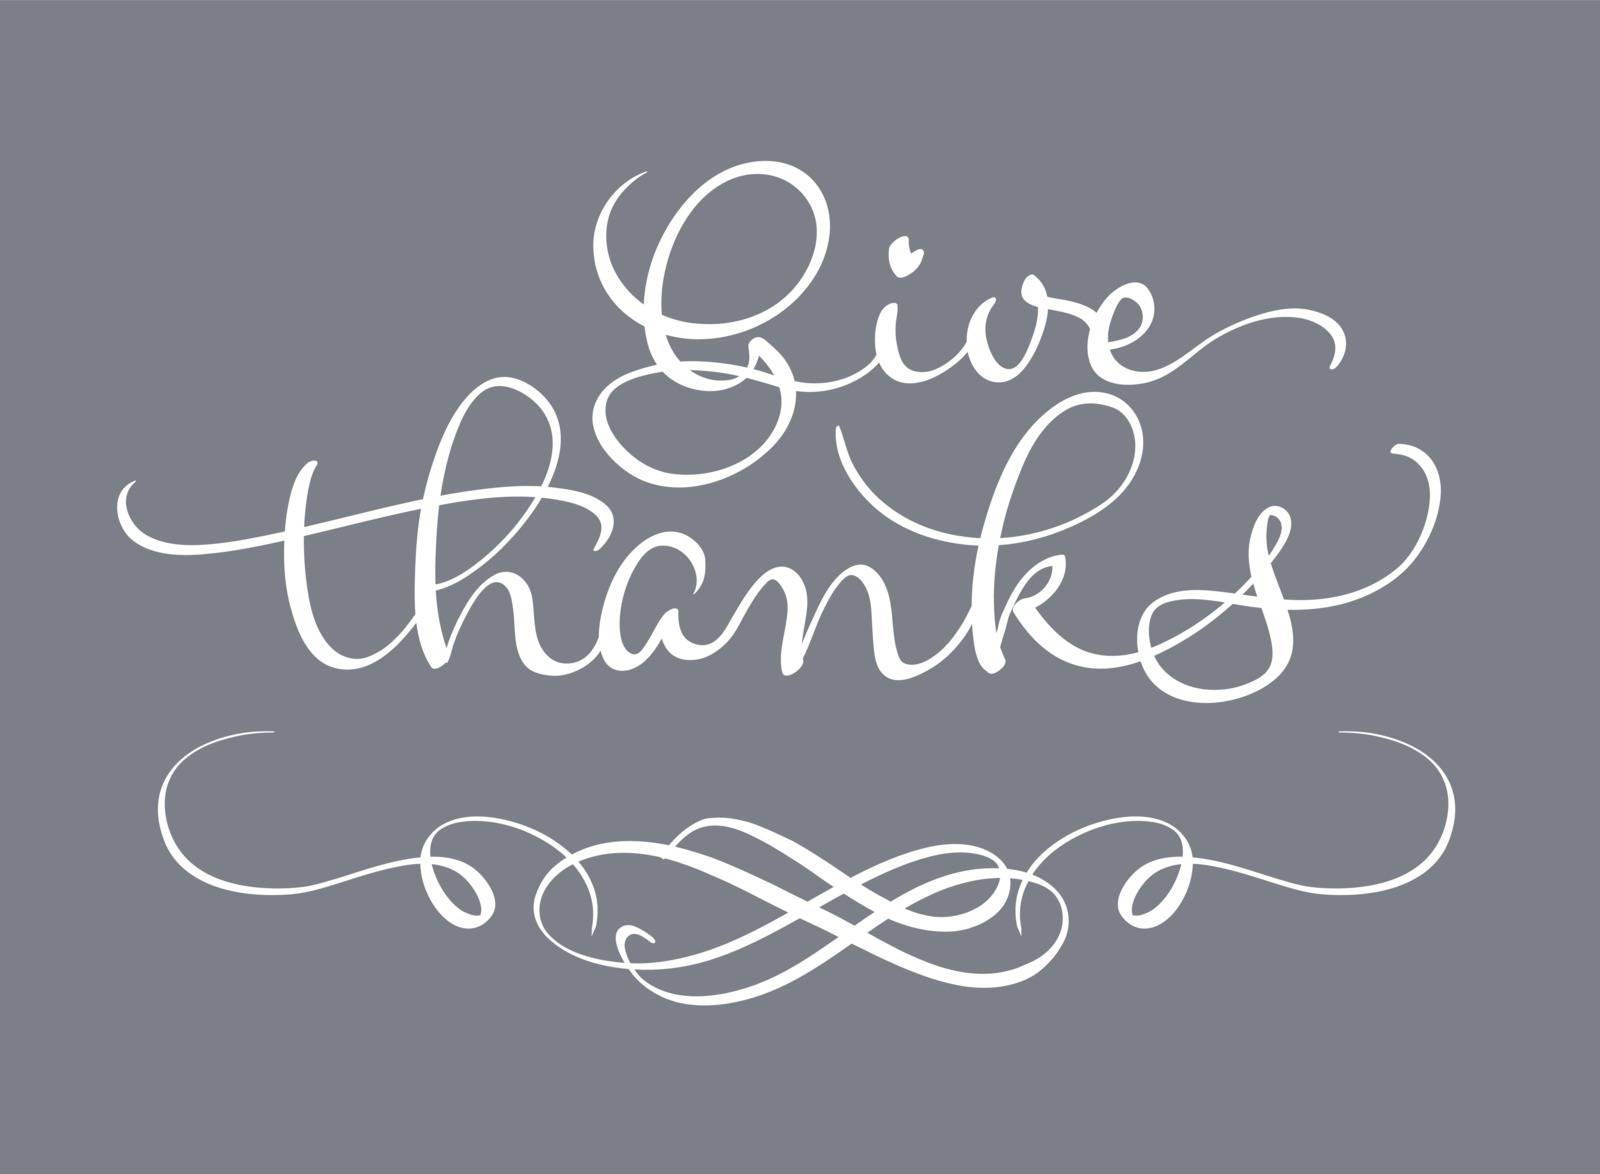 Give thanks text on gray background. Calligraphy lettering Vector illustration EPS10.